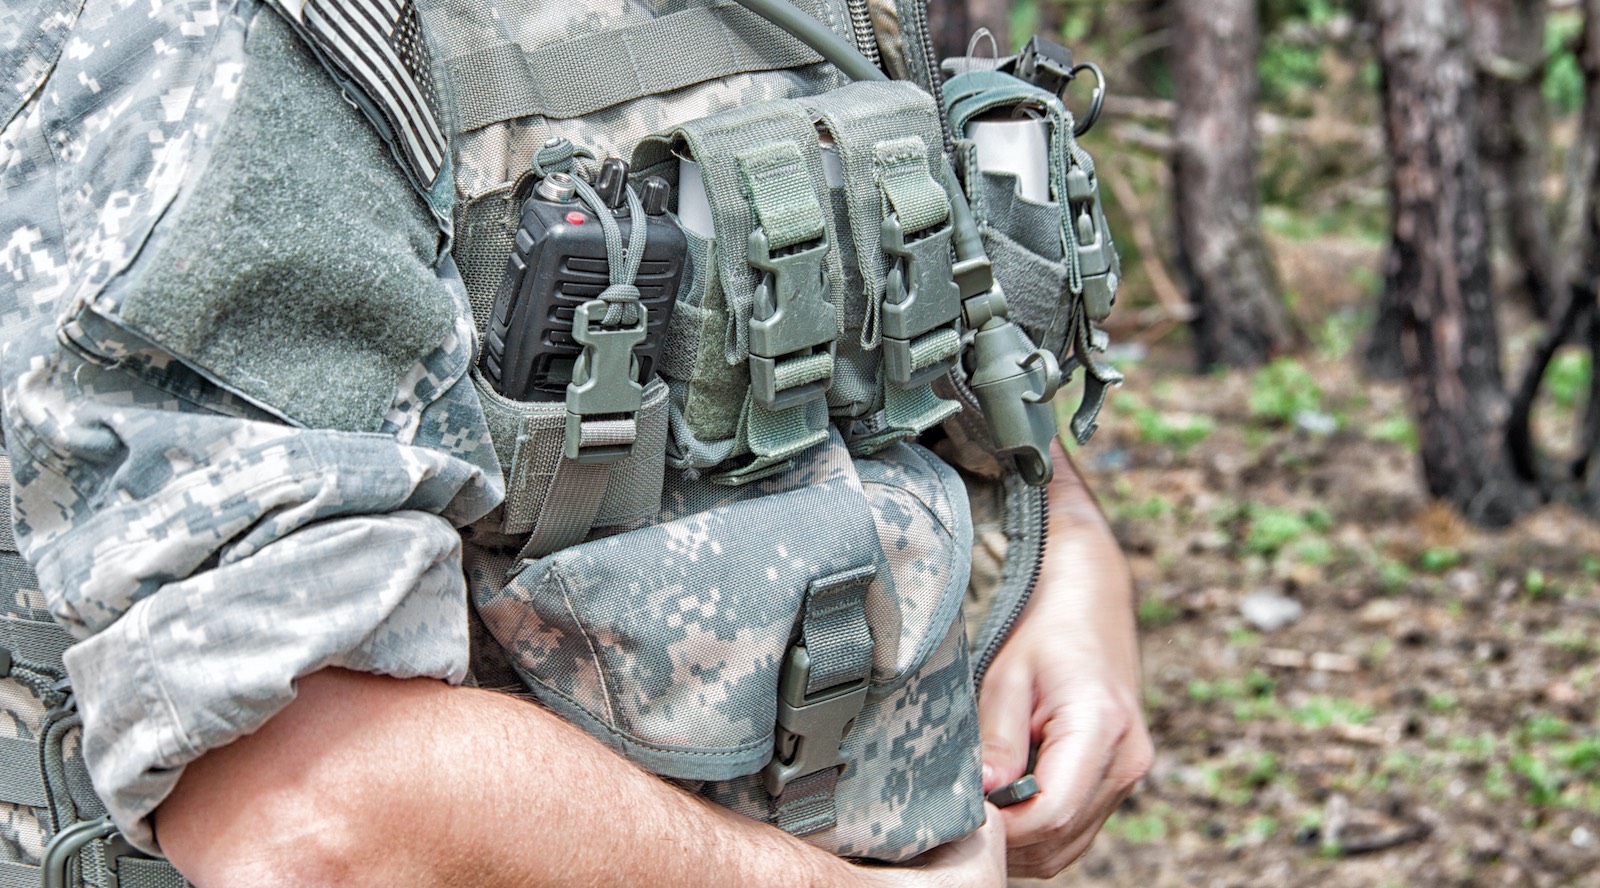 Energy density in wearables for military gear